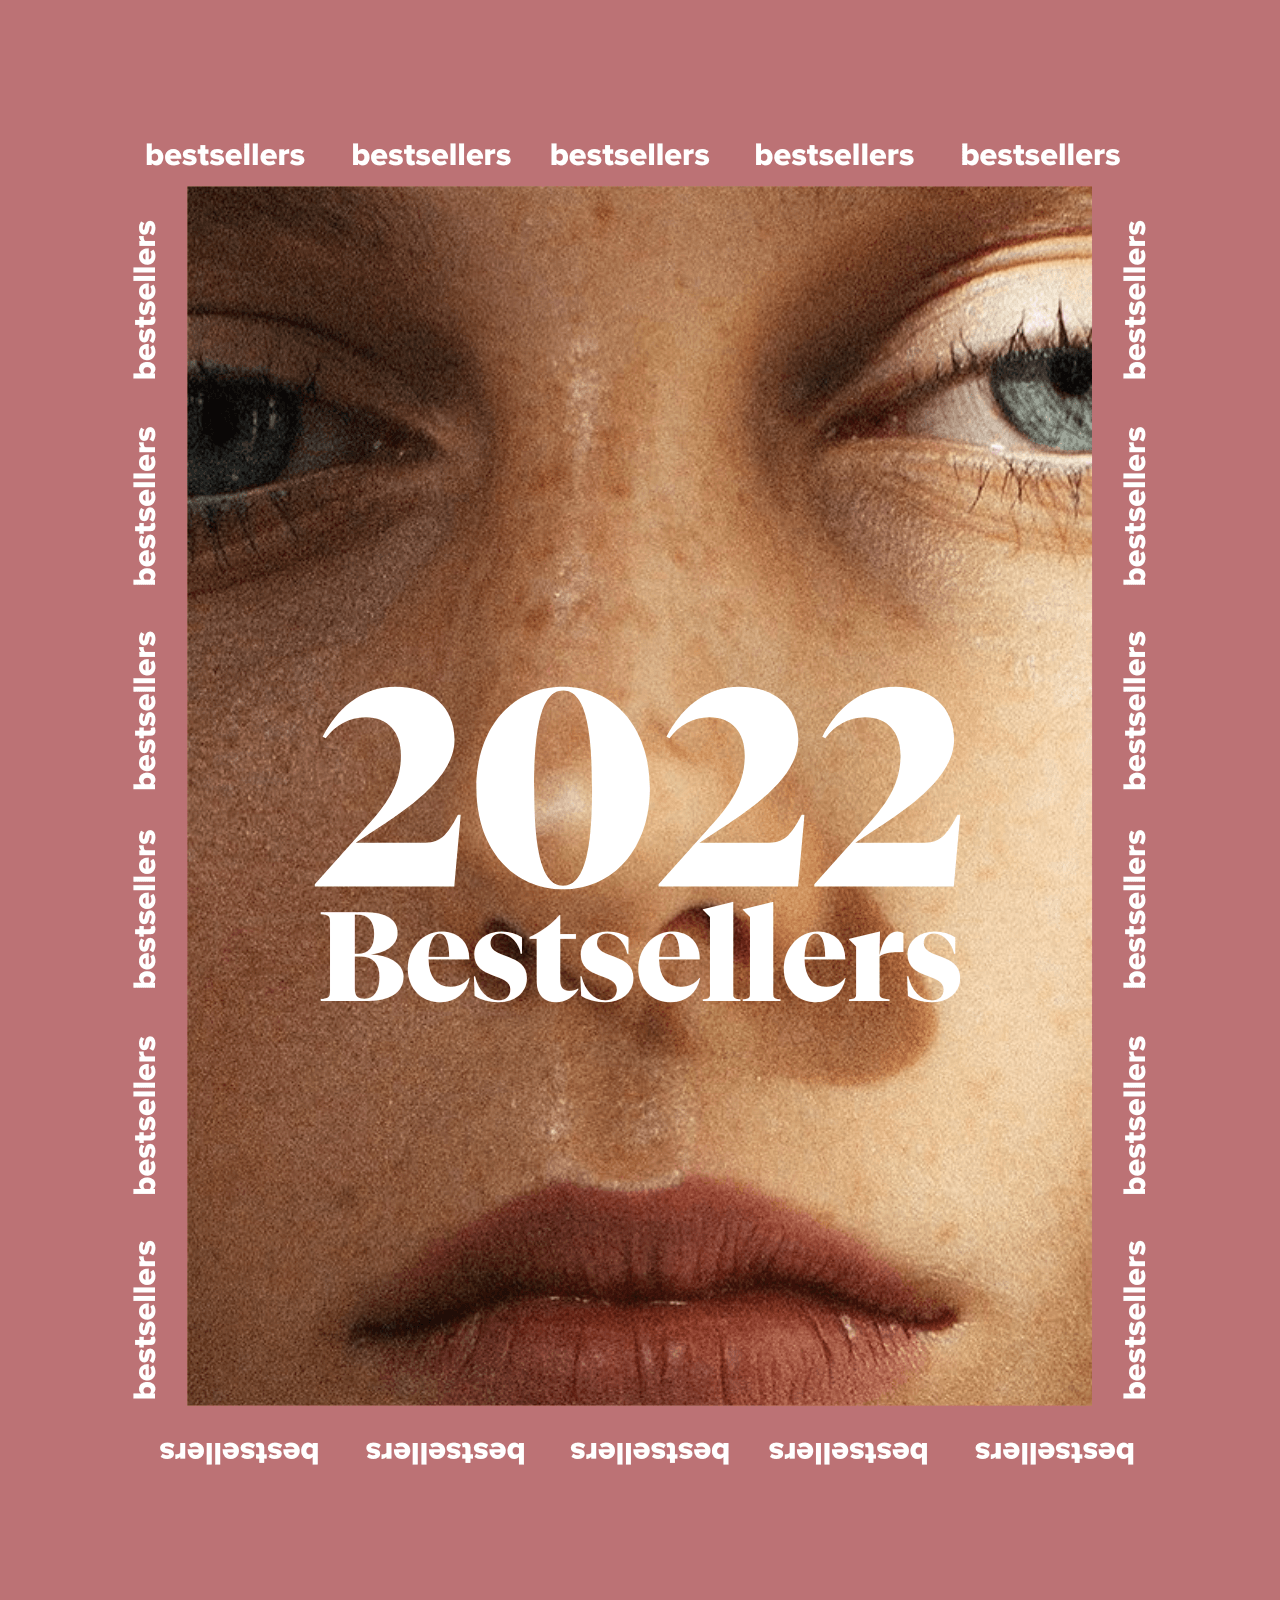 NAQED BESTSELLERS 2022